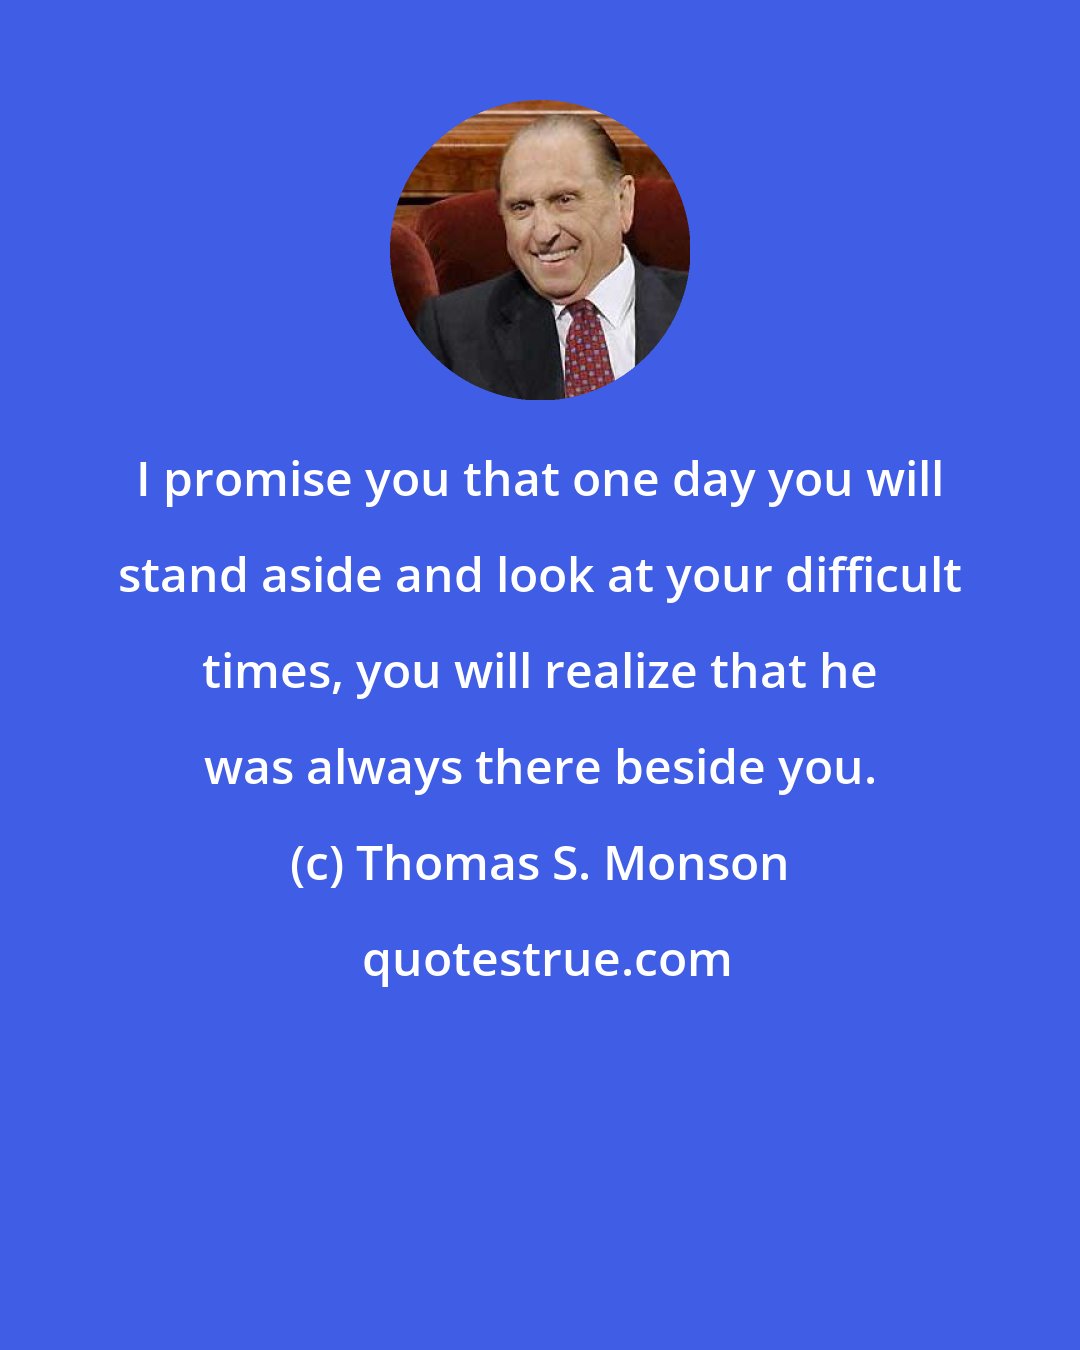 Thomas S. Monson: I promise you that one day you will stand aside and look at your difficult times, you will realize that he was always there beside you.